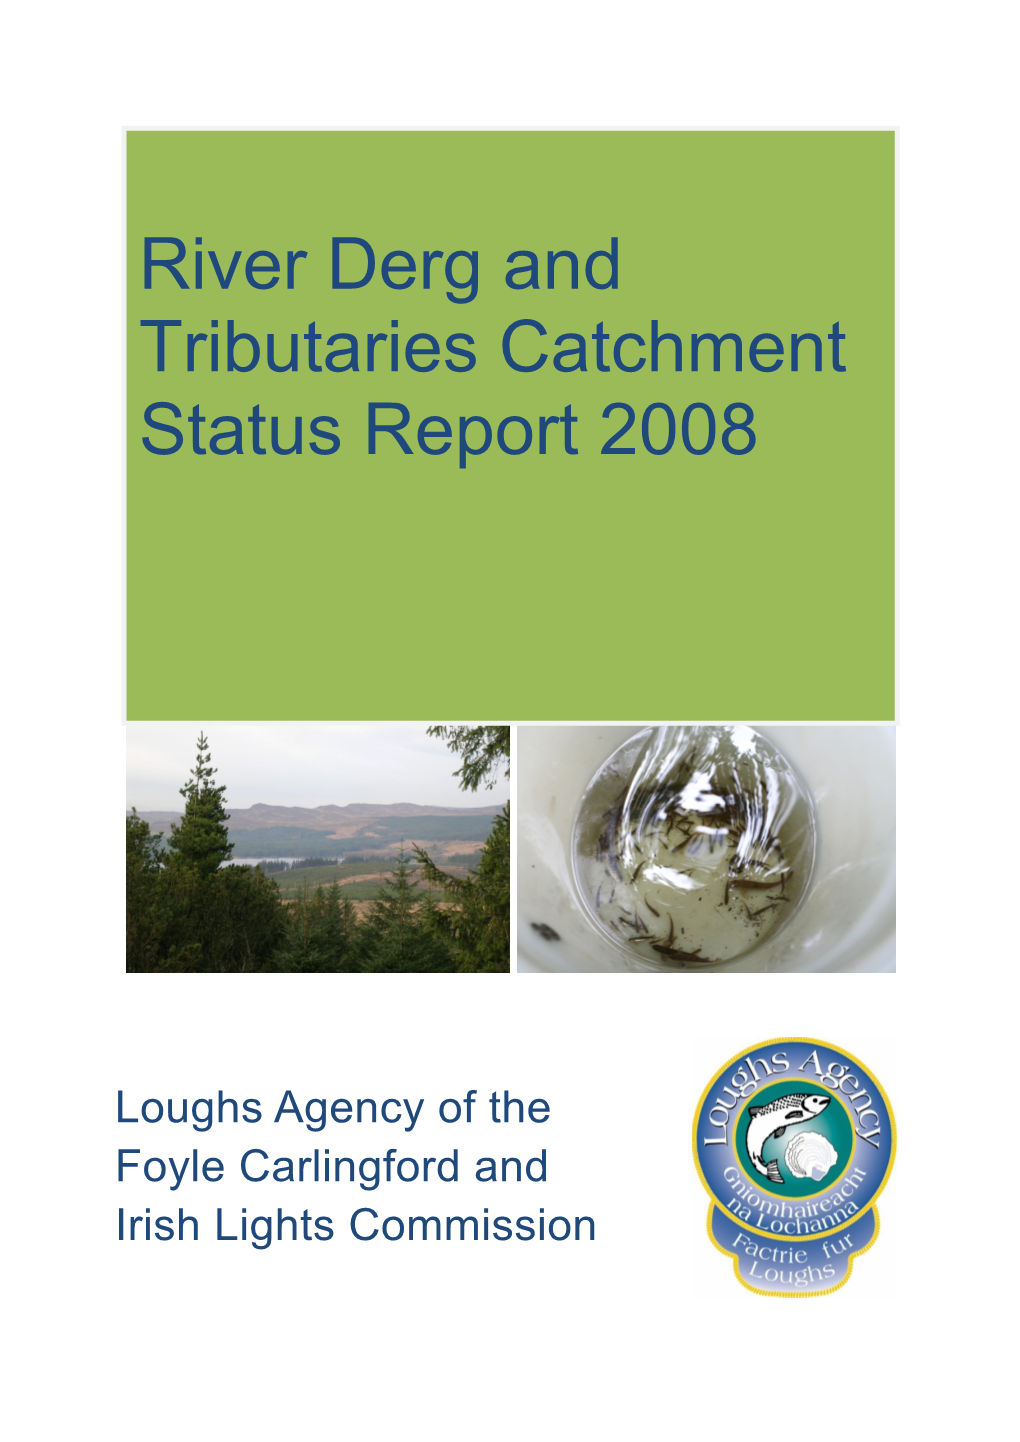 River Derg and Tributaries Catchment Status Report 2008